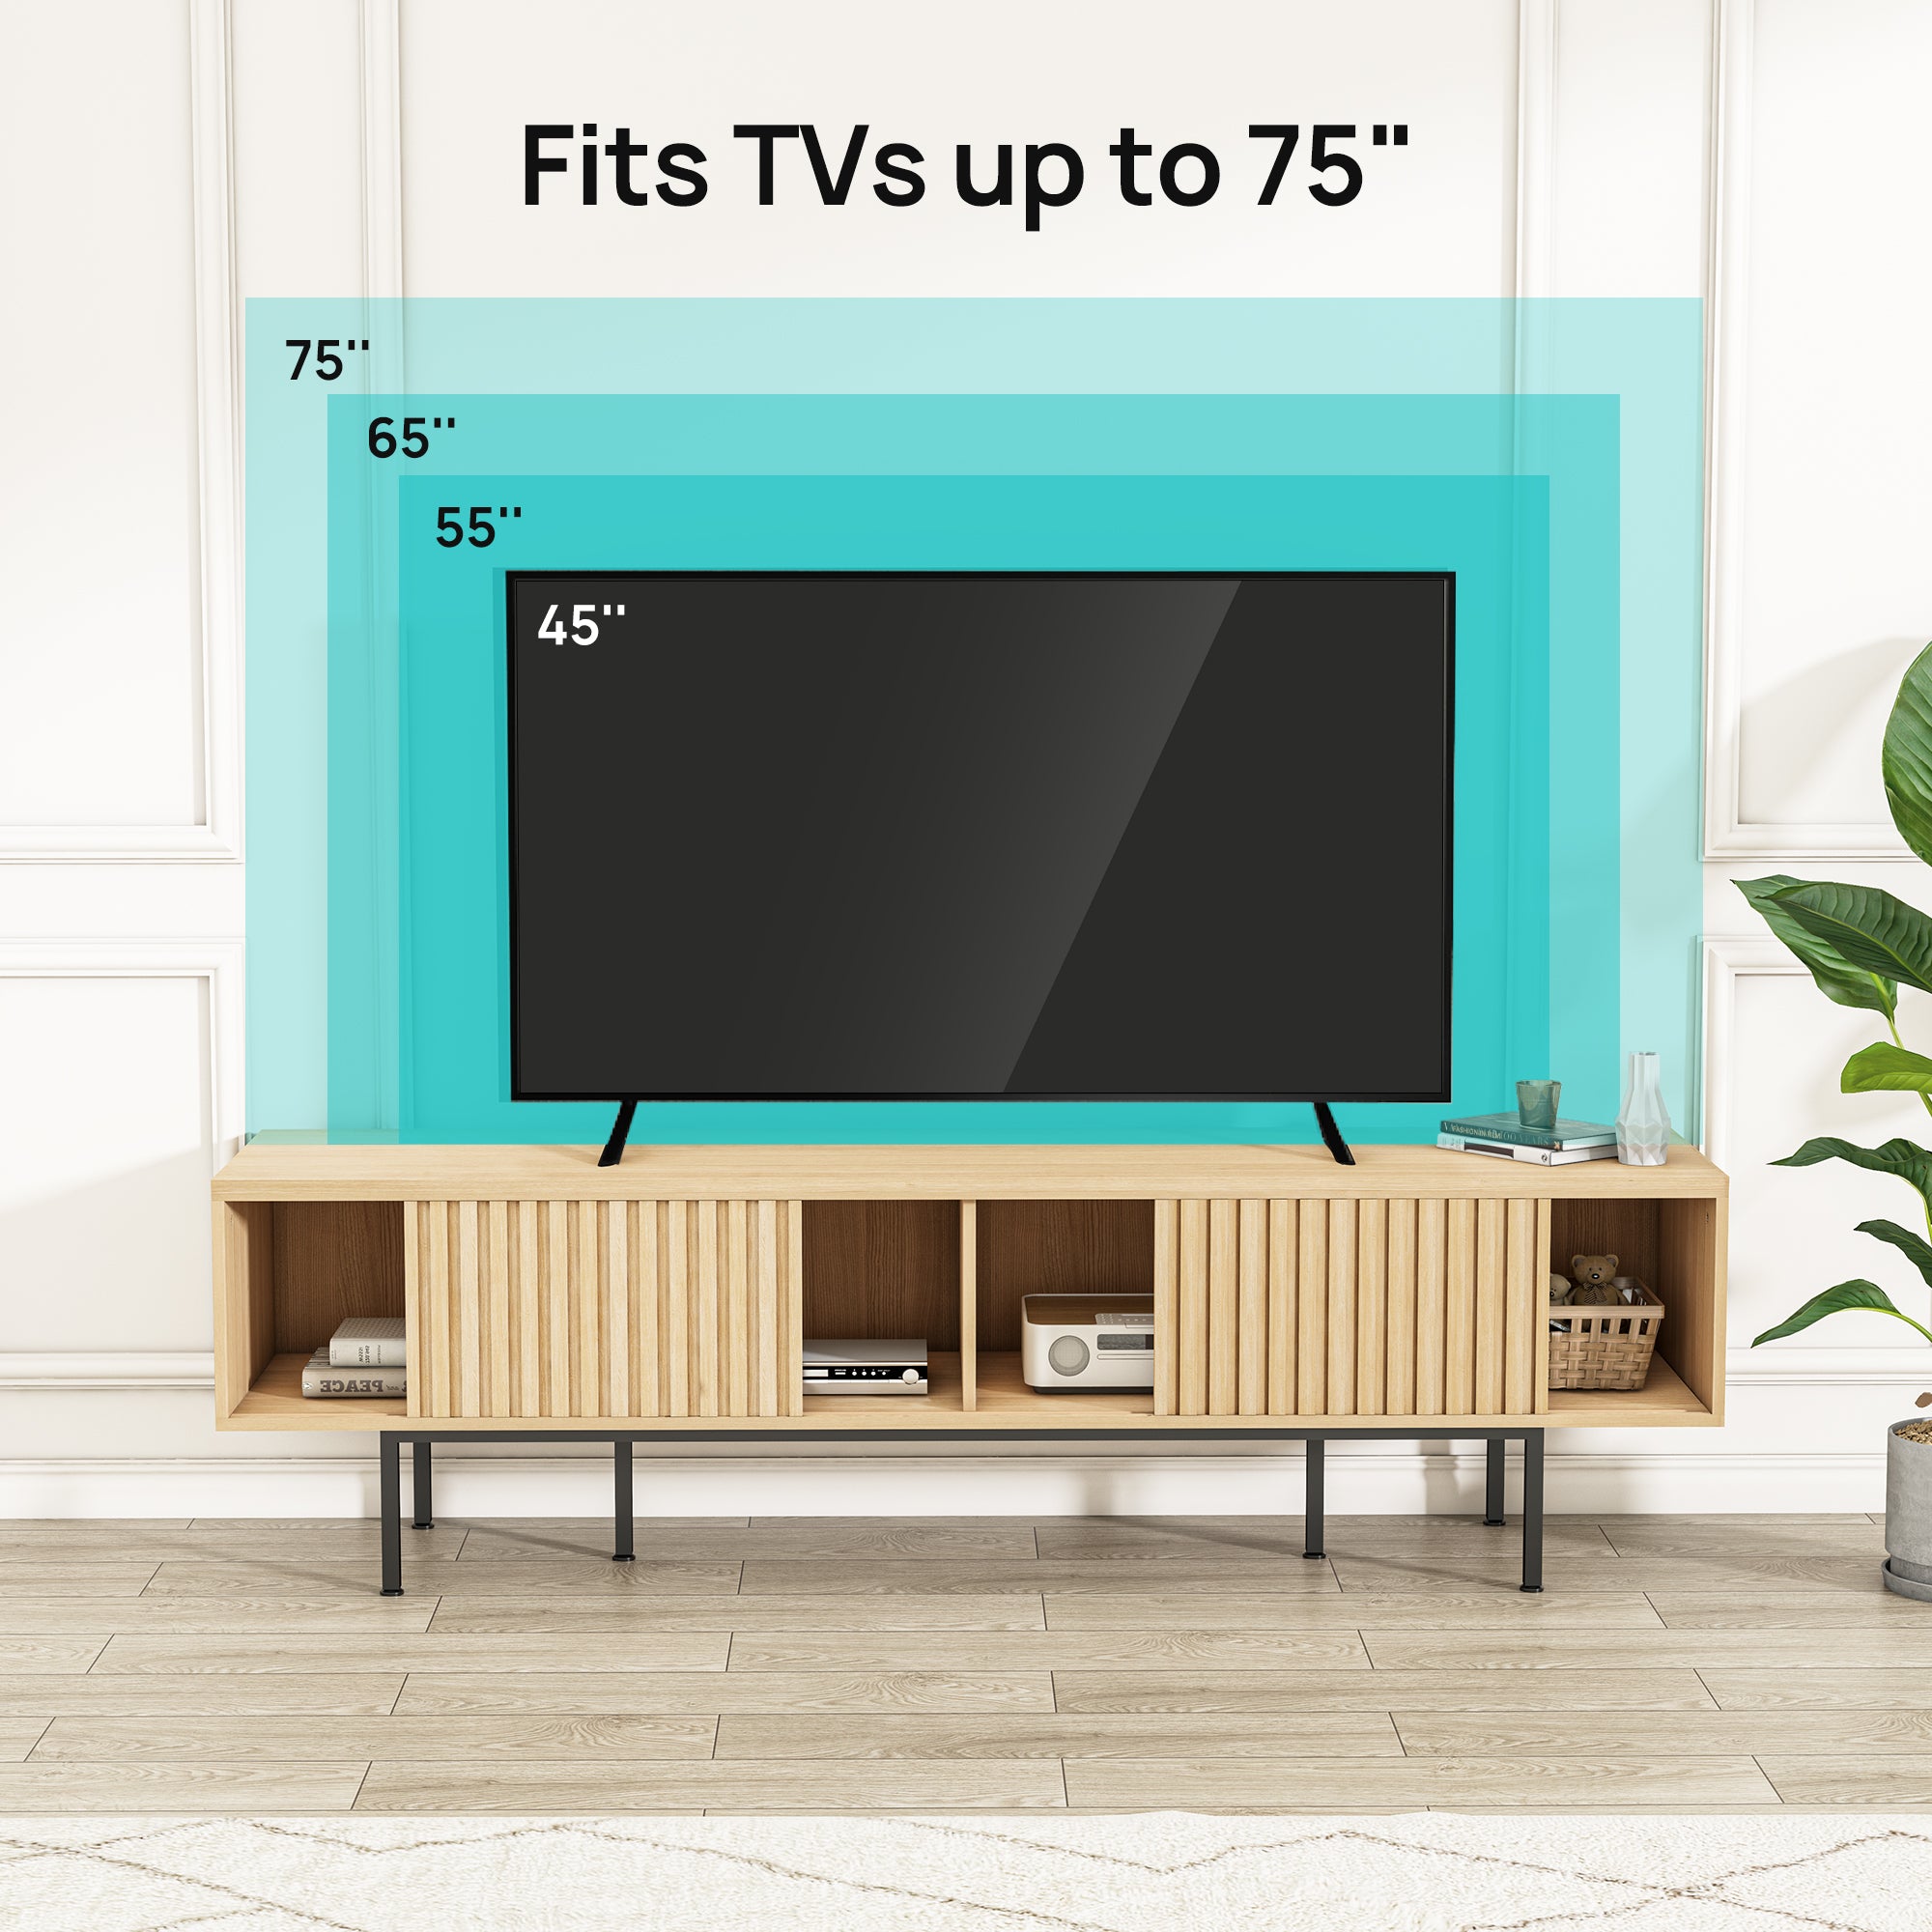 Evajoy LRF009 TV Stand, Wood Entertainment Center with Storage Shelves Cabinet, 70'' Mid Century Modern Television Stand